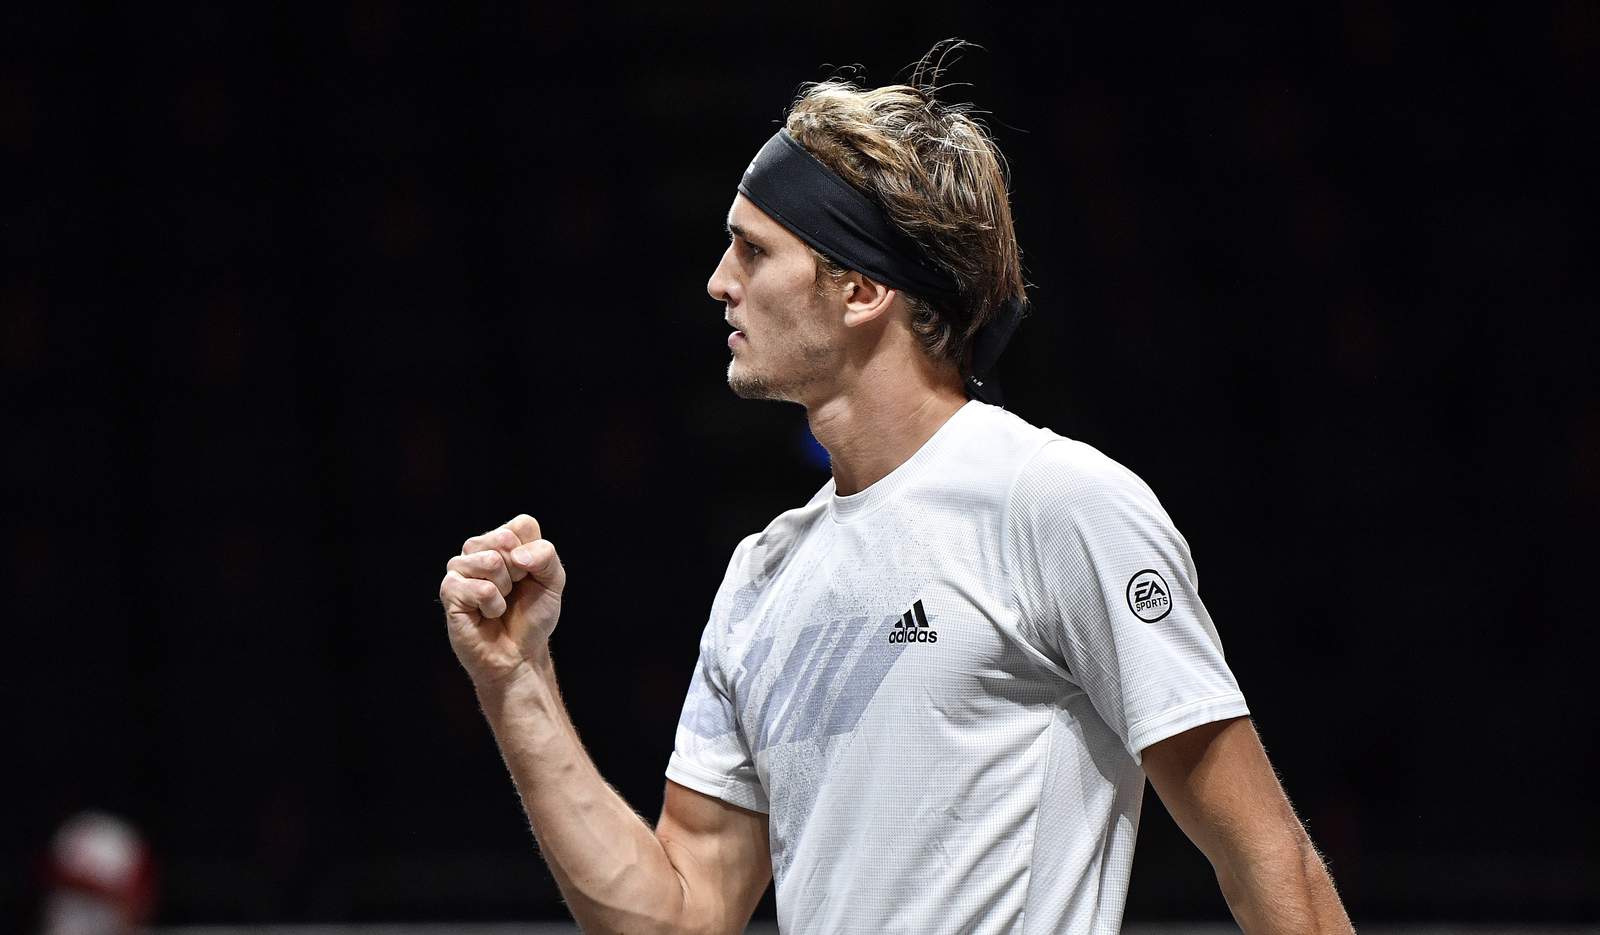 Zverev beats Auger-Aliassime in Cologne to end title wait